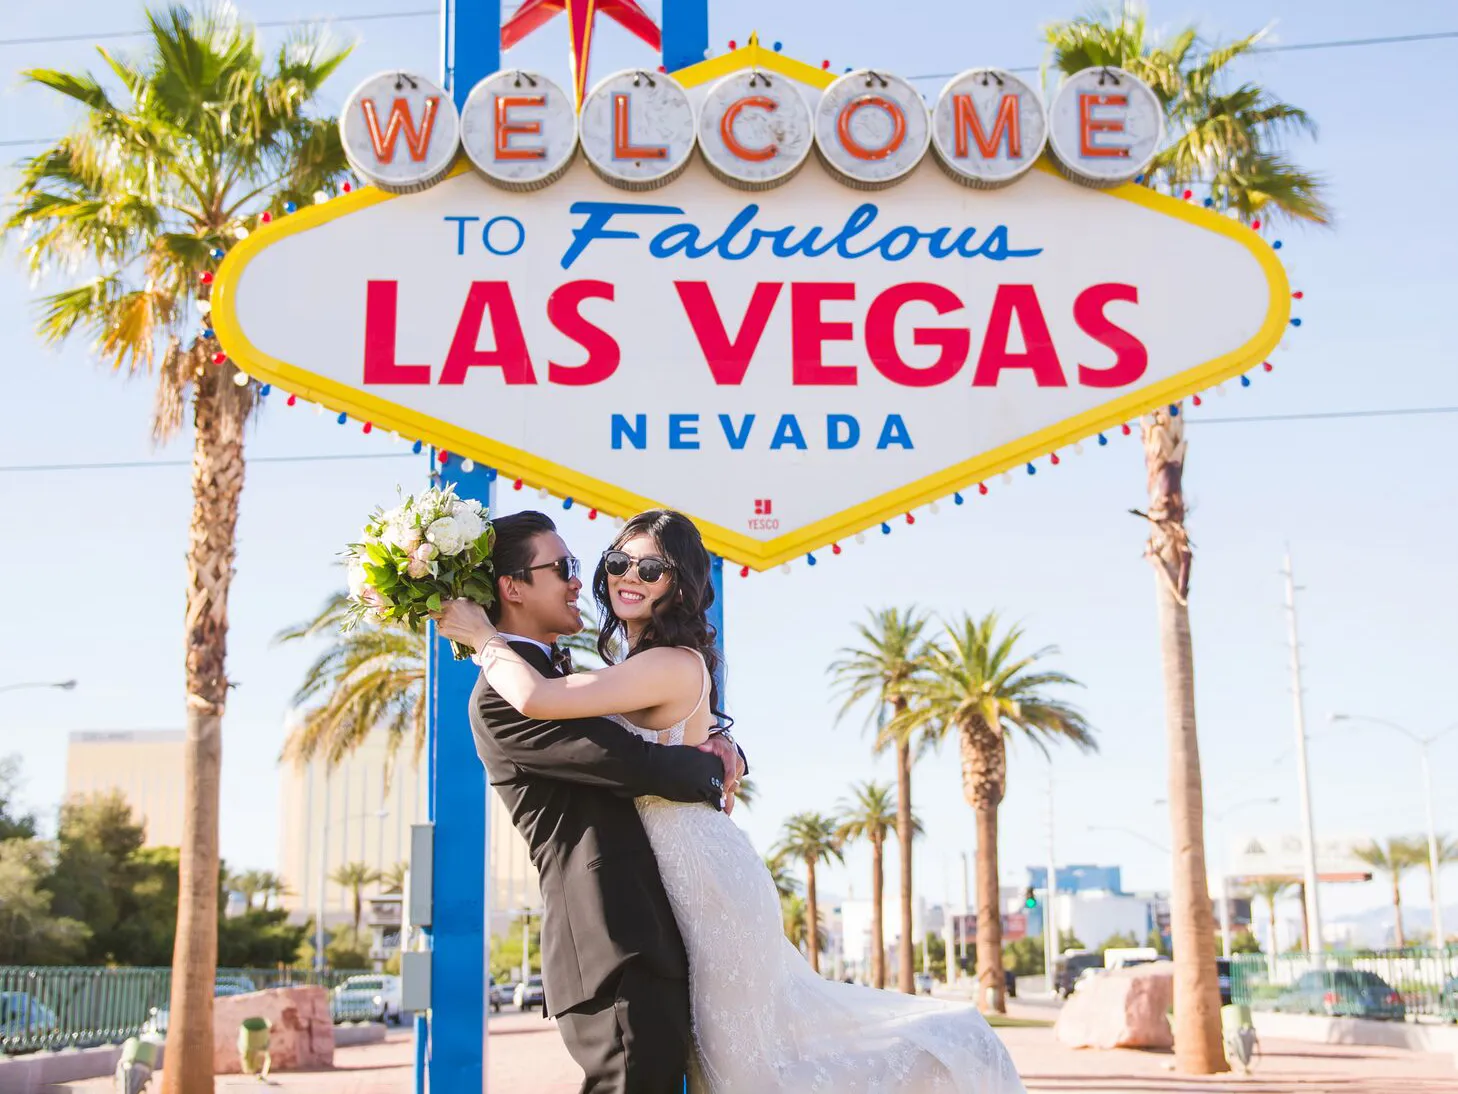 The Best Way to Save a Marriage in Las Vegas